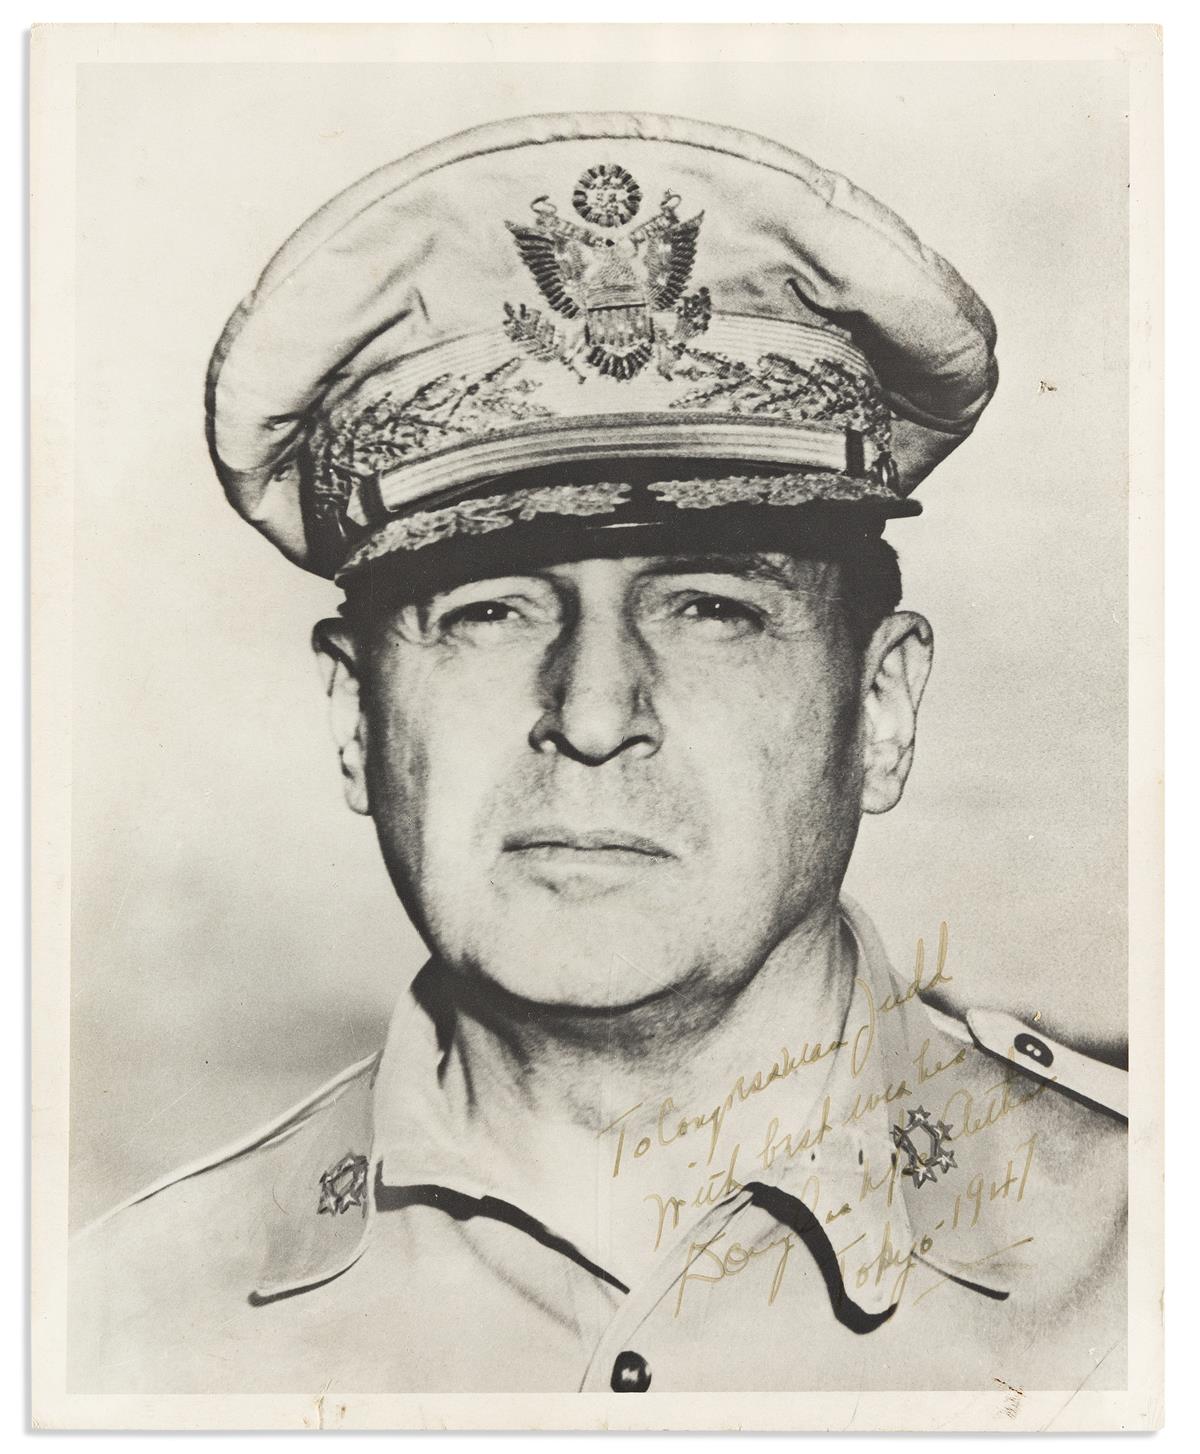 (WORLD WAR II.) MACARTHUR, DOUGLAS. Photograph Signed and Inscribed, To Congressman Judd / With best wishes / Douglas MacArthur / Toky